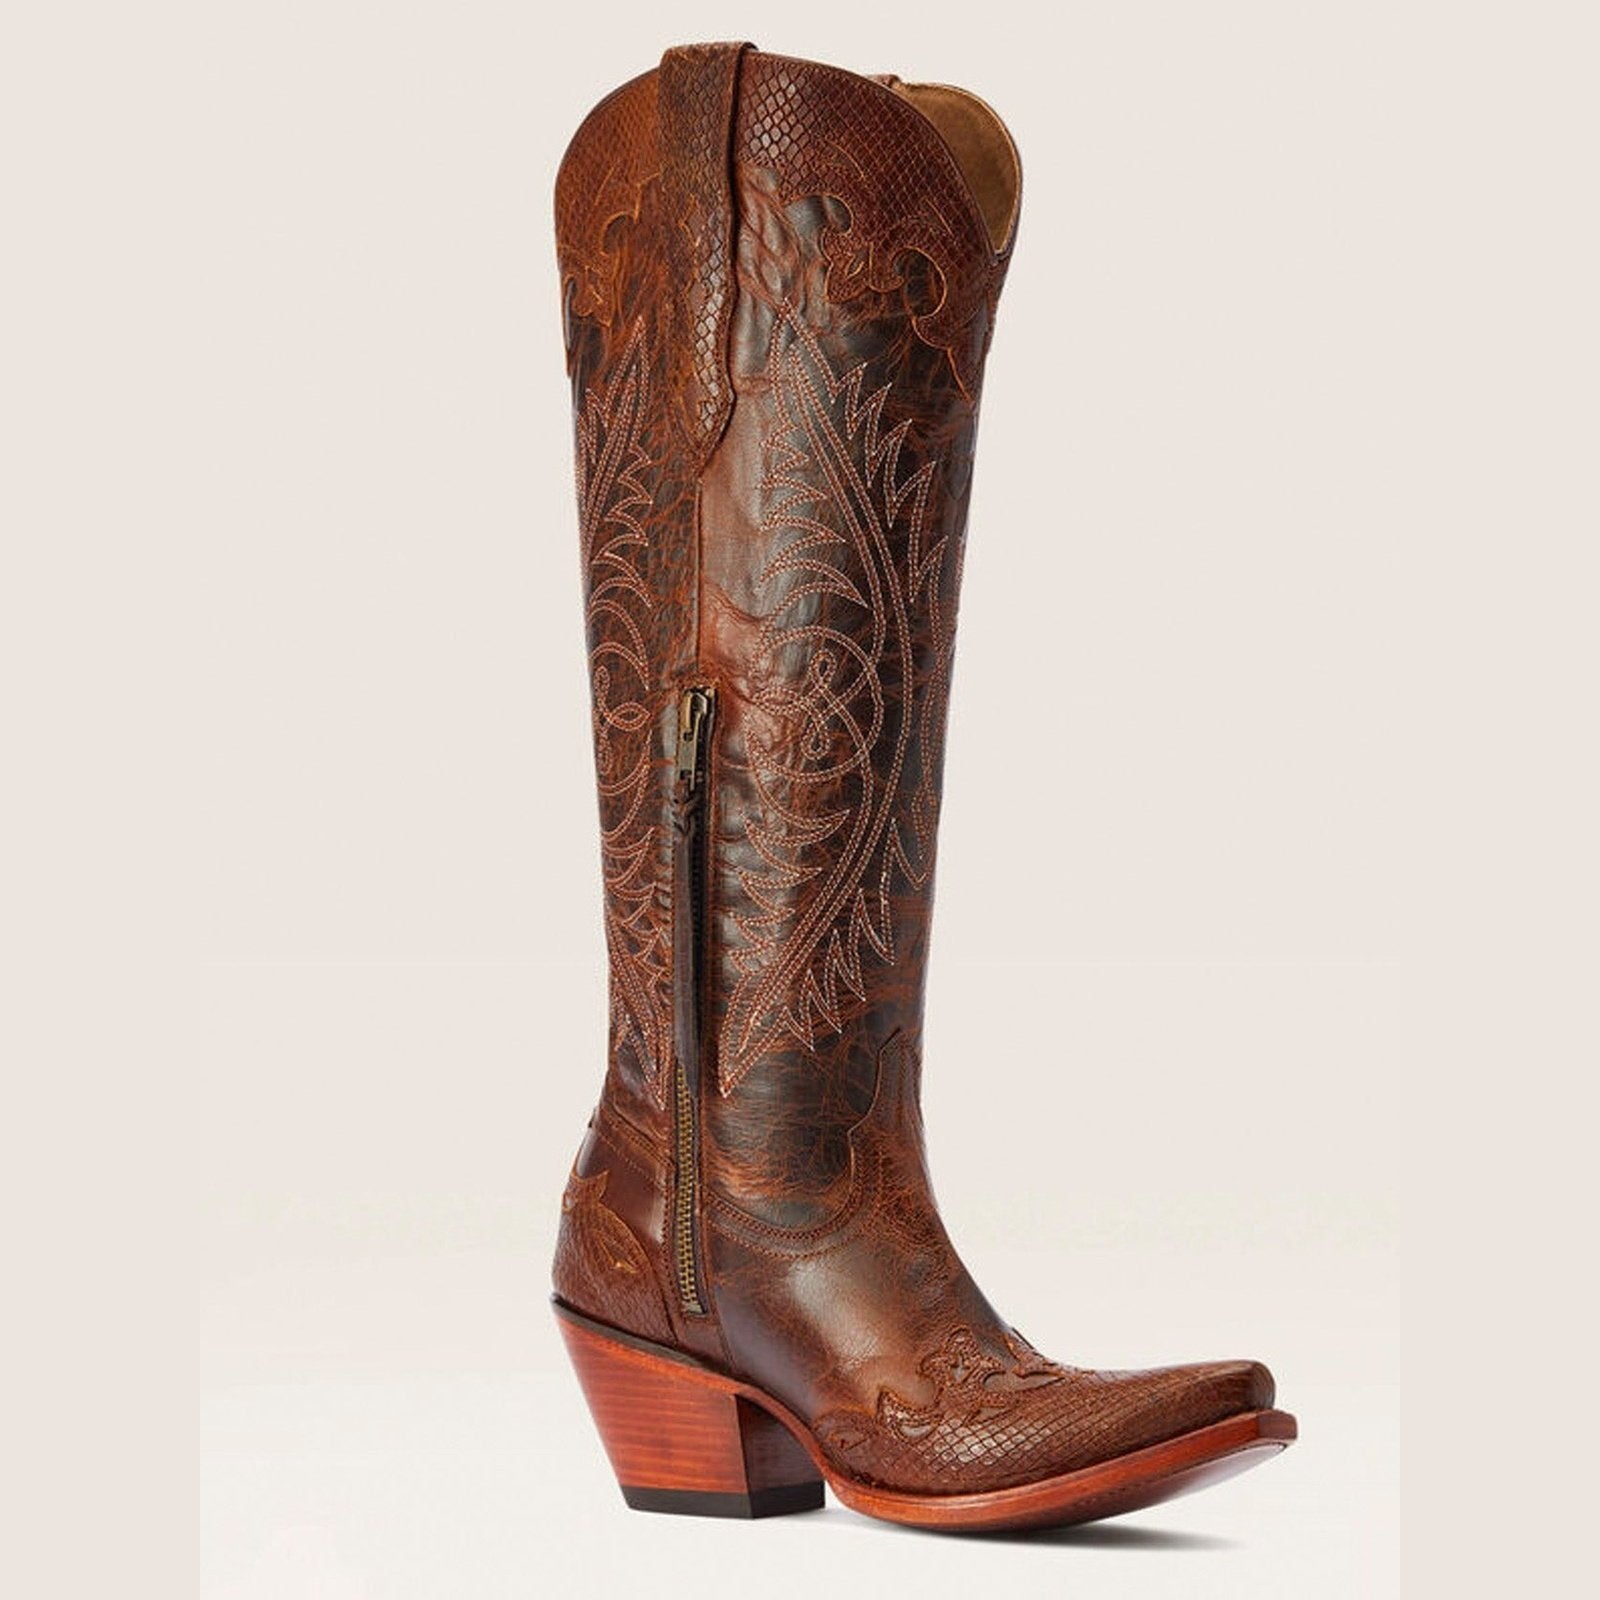 Ariat Women’s Cowgirl Boot 16" Cowhide Stretch Fit X Toe New West Heel 10042483 - Ariat